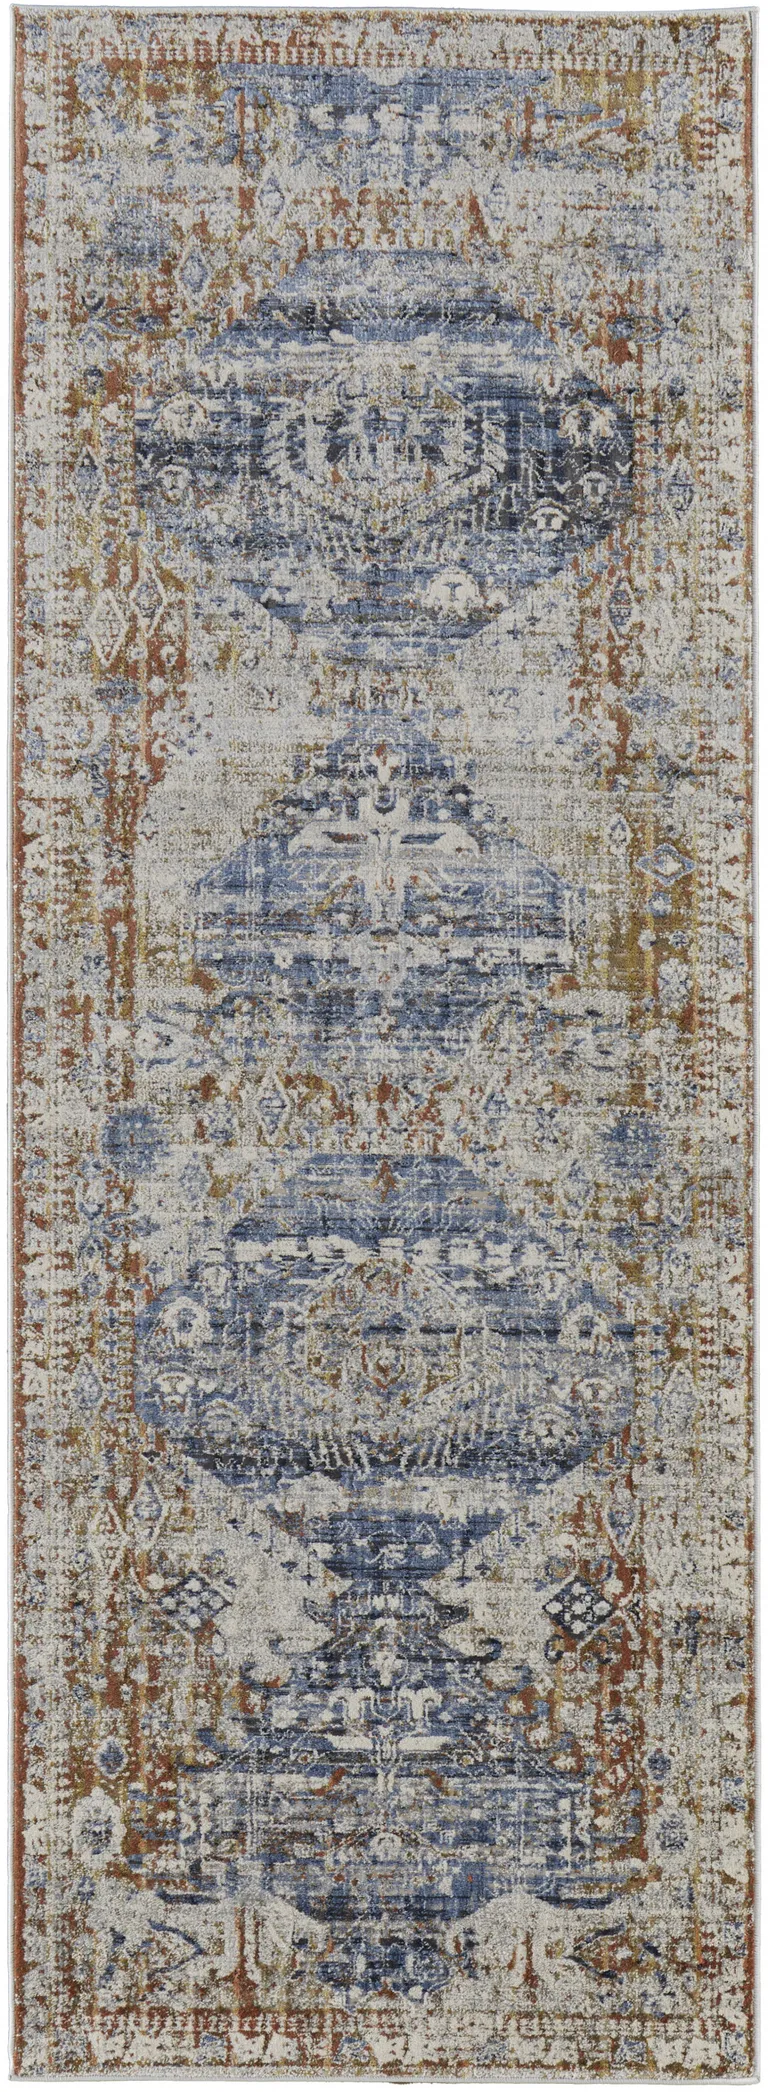 8' Ivory Orange And Blue Floral Power Loom Distressed Runner Rug With Fringe Photo 1